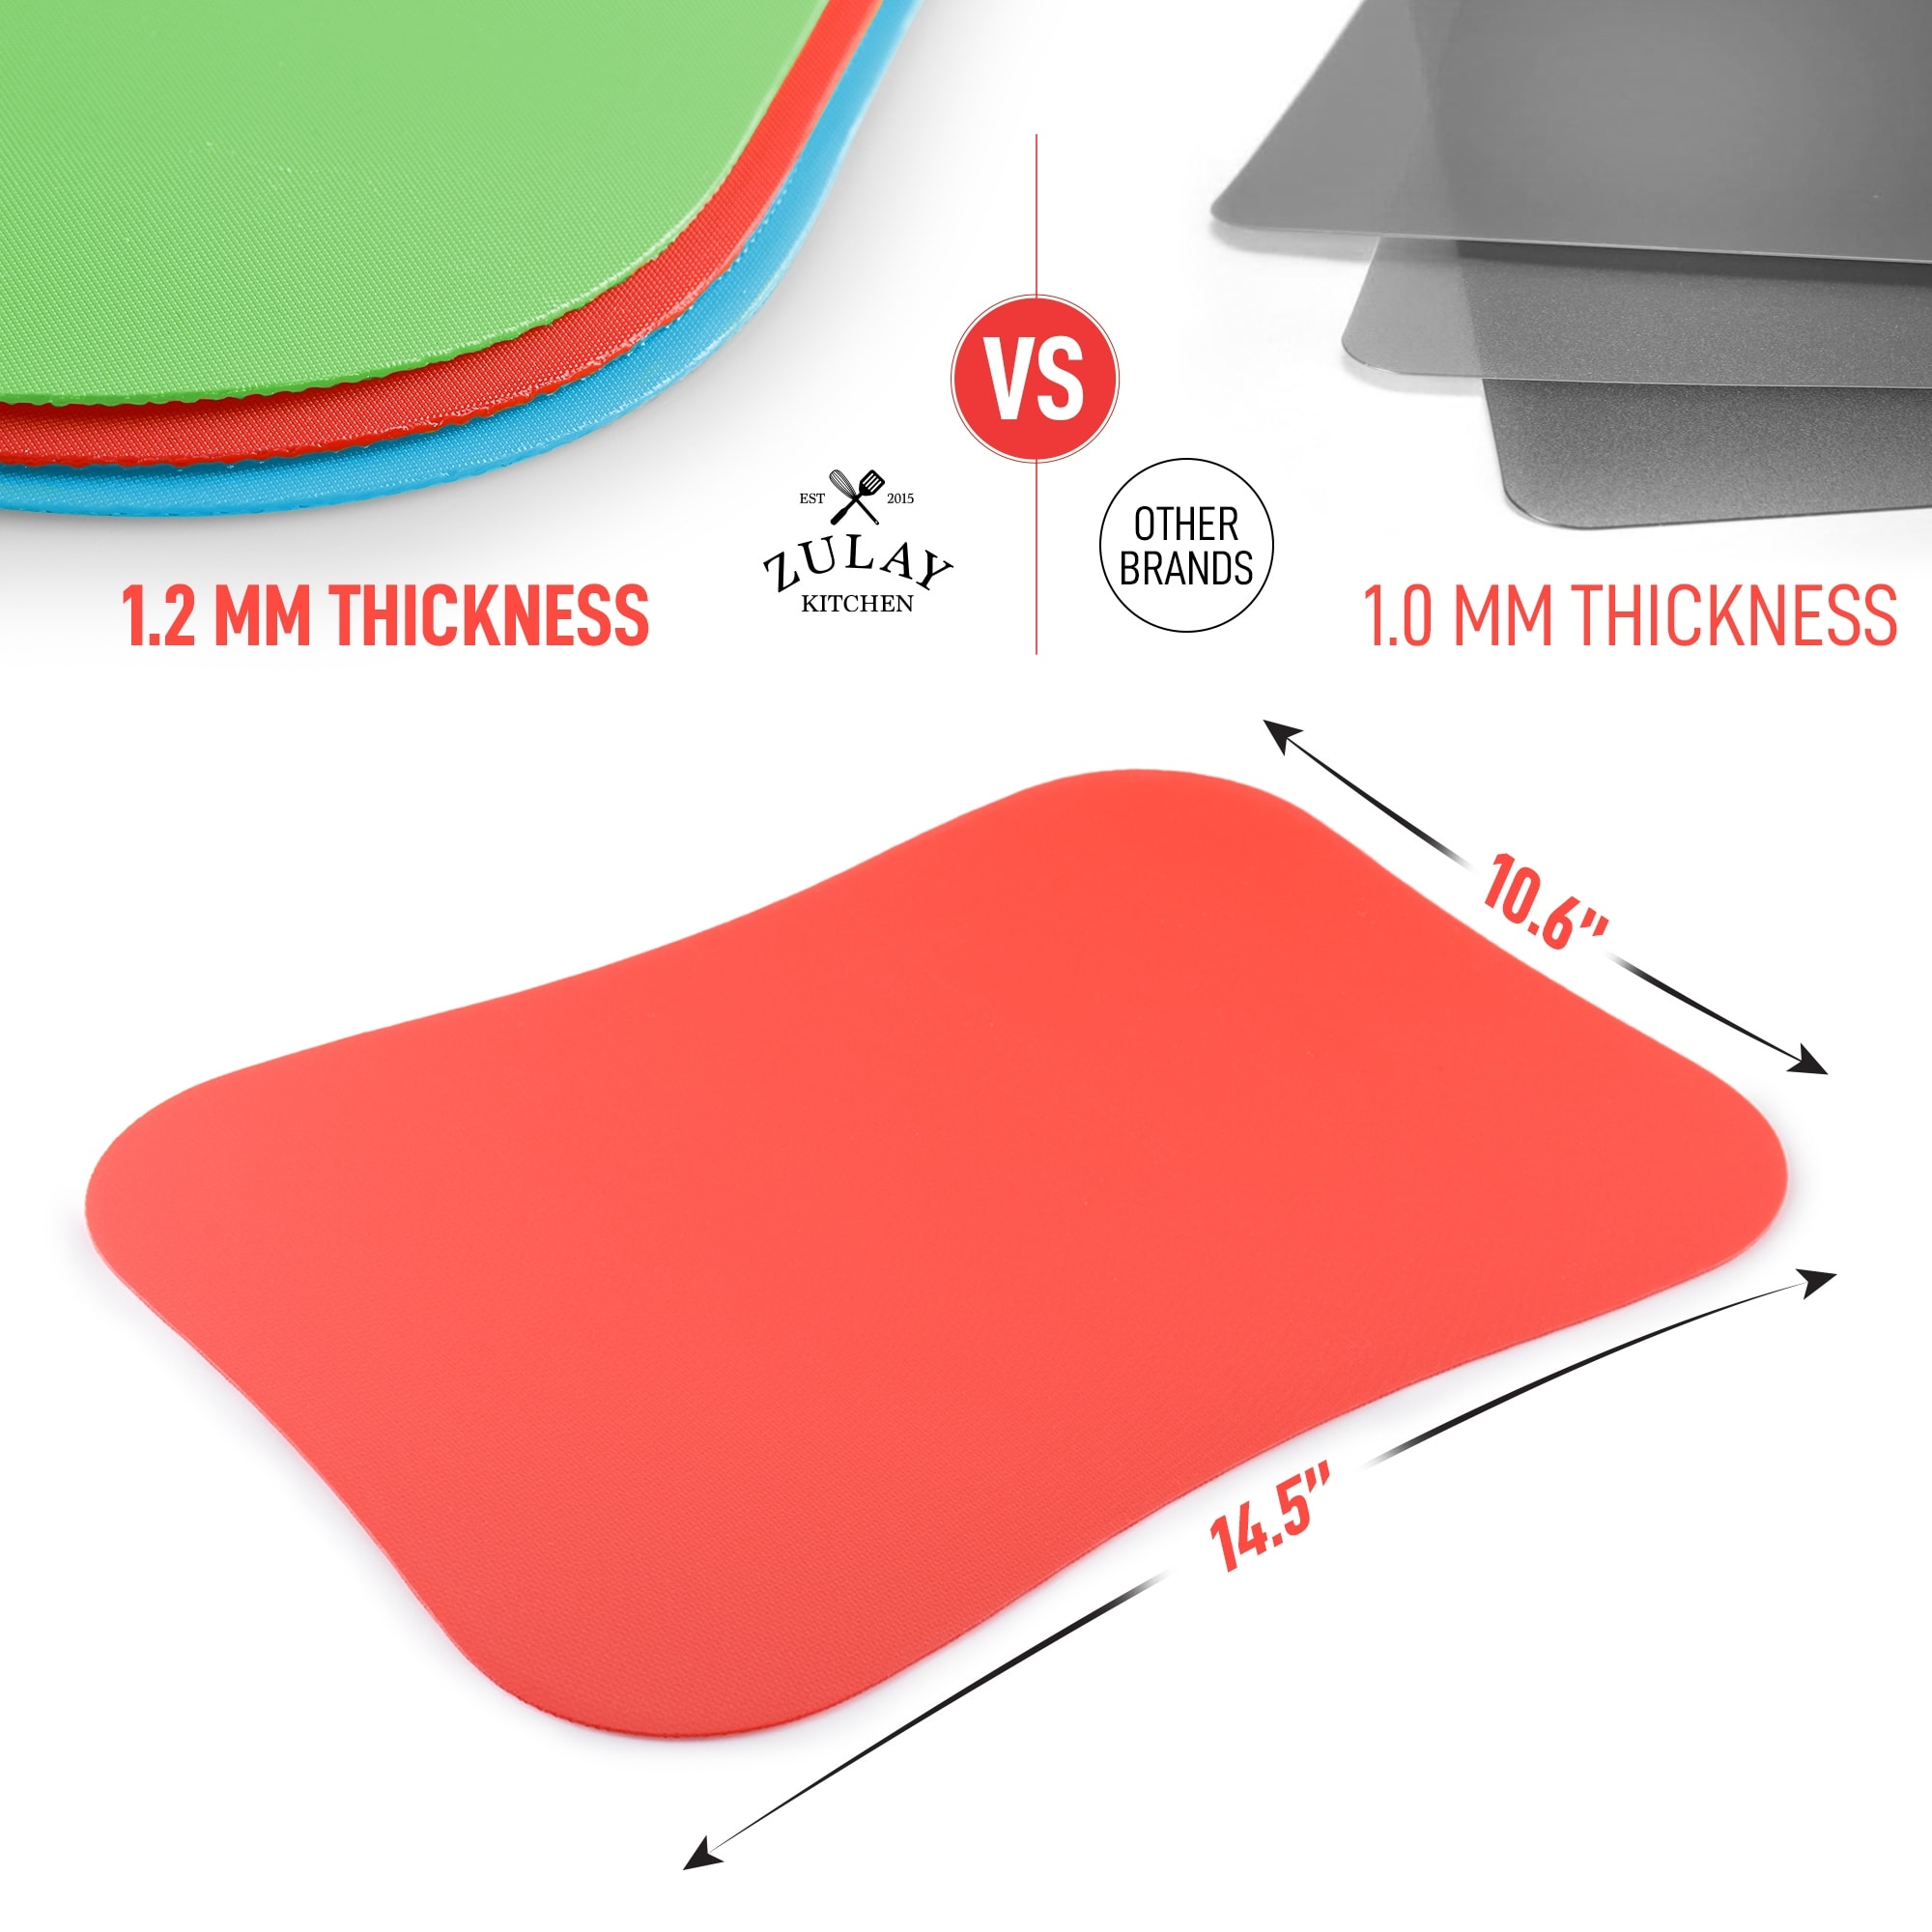 https://ak1.ostkcdn.com/images/products/is/images/direct/ba0ad82cadd0b6b9ac2787e22470c199d31f47da/Zulay-Kitchen-Extra-Thick-Flexible-Cutting-Board-Mats-for-Kitchen.jpg